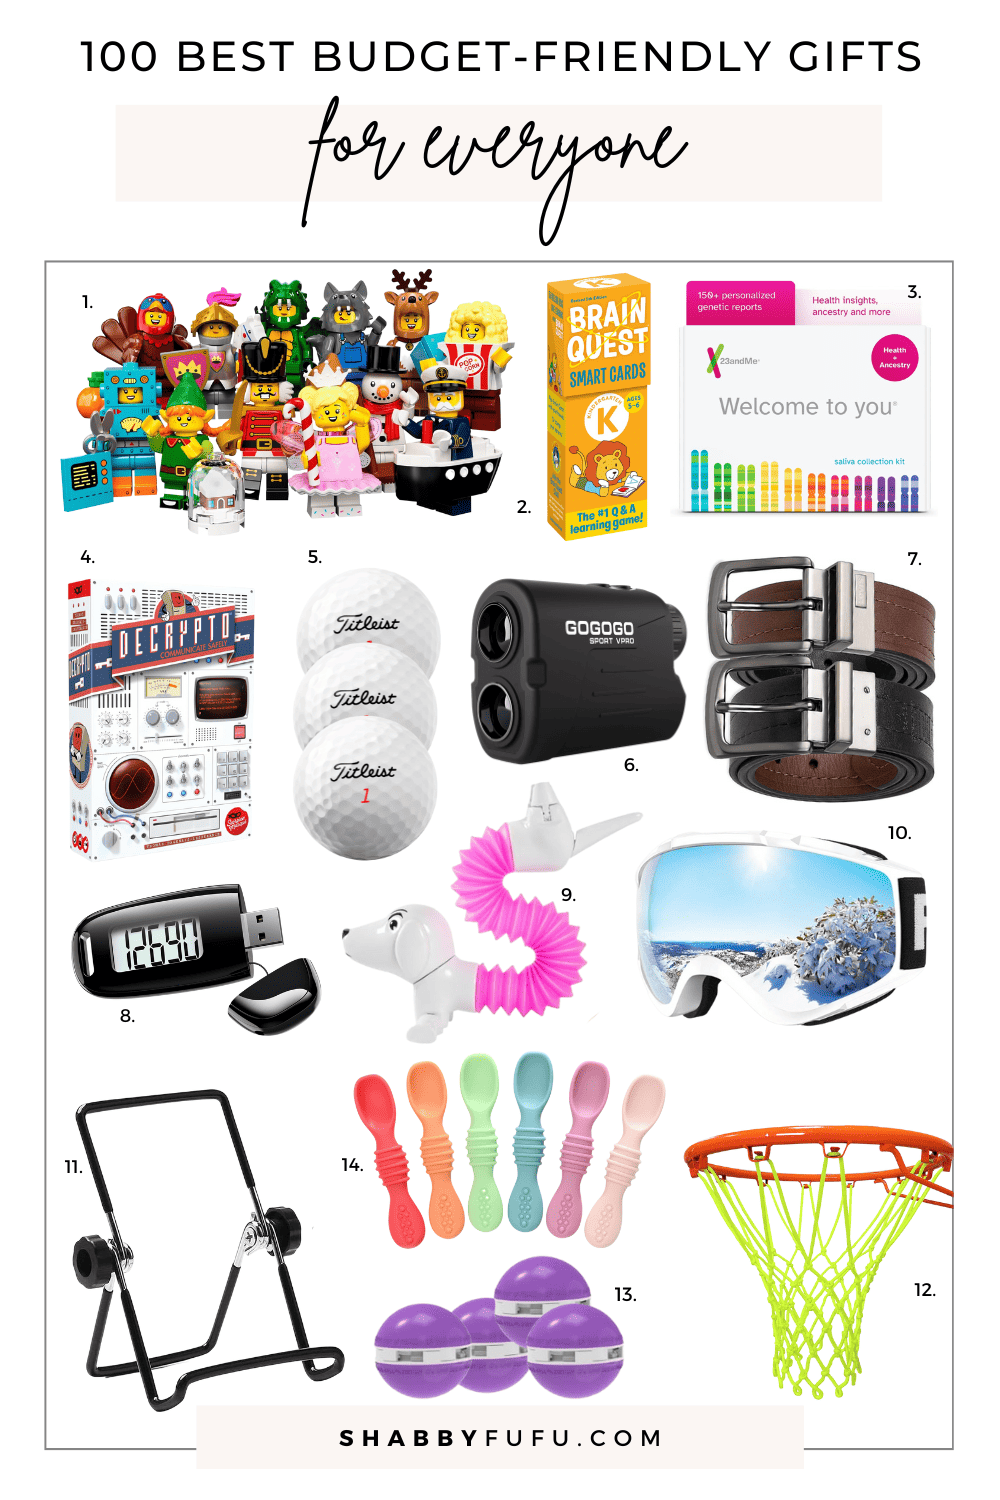 Collage image featuring different products titled "100 Best Budget-Friendly Holiday Gift Ideas For Everyone!"